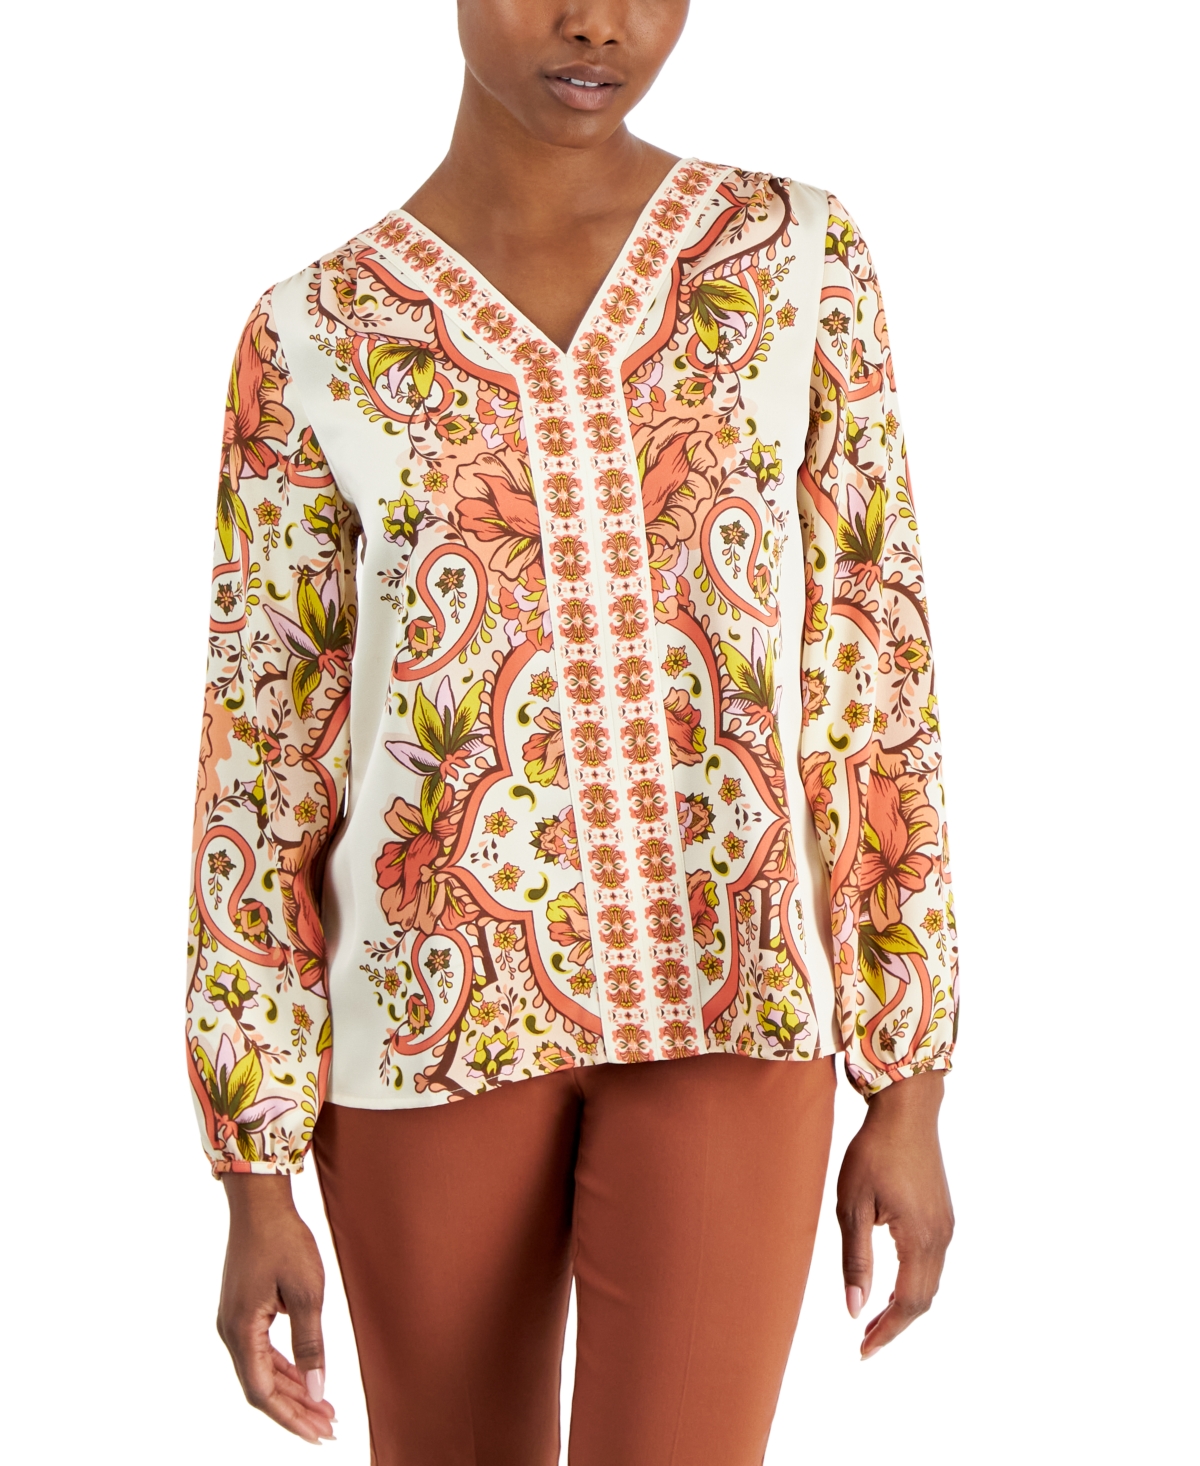 Jm Collection Petite Blooming Runner Placket Satin Top, Created For Macy's In Sandshell Combo